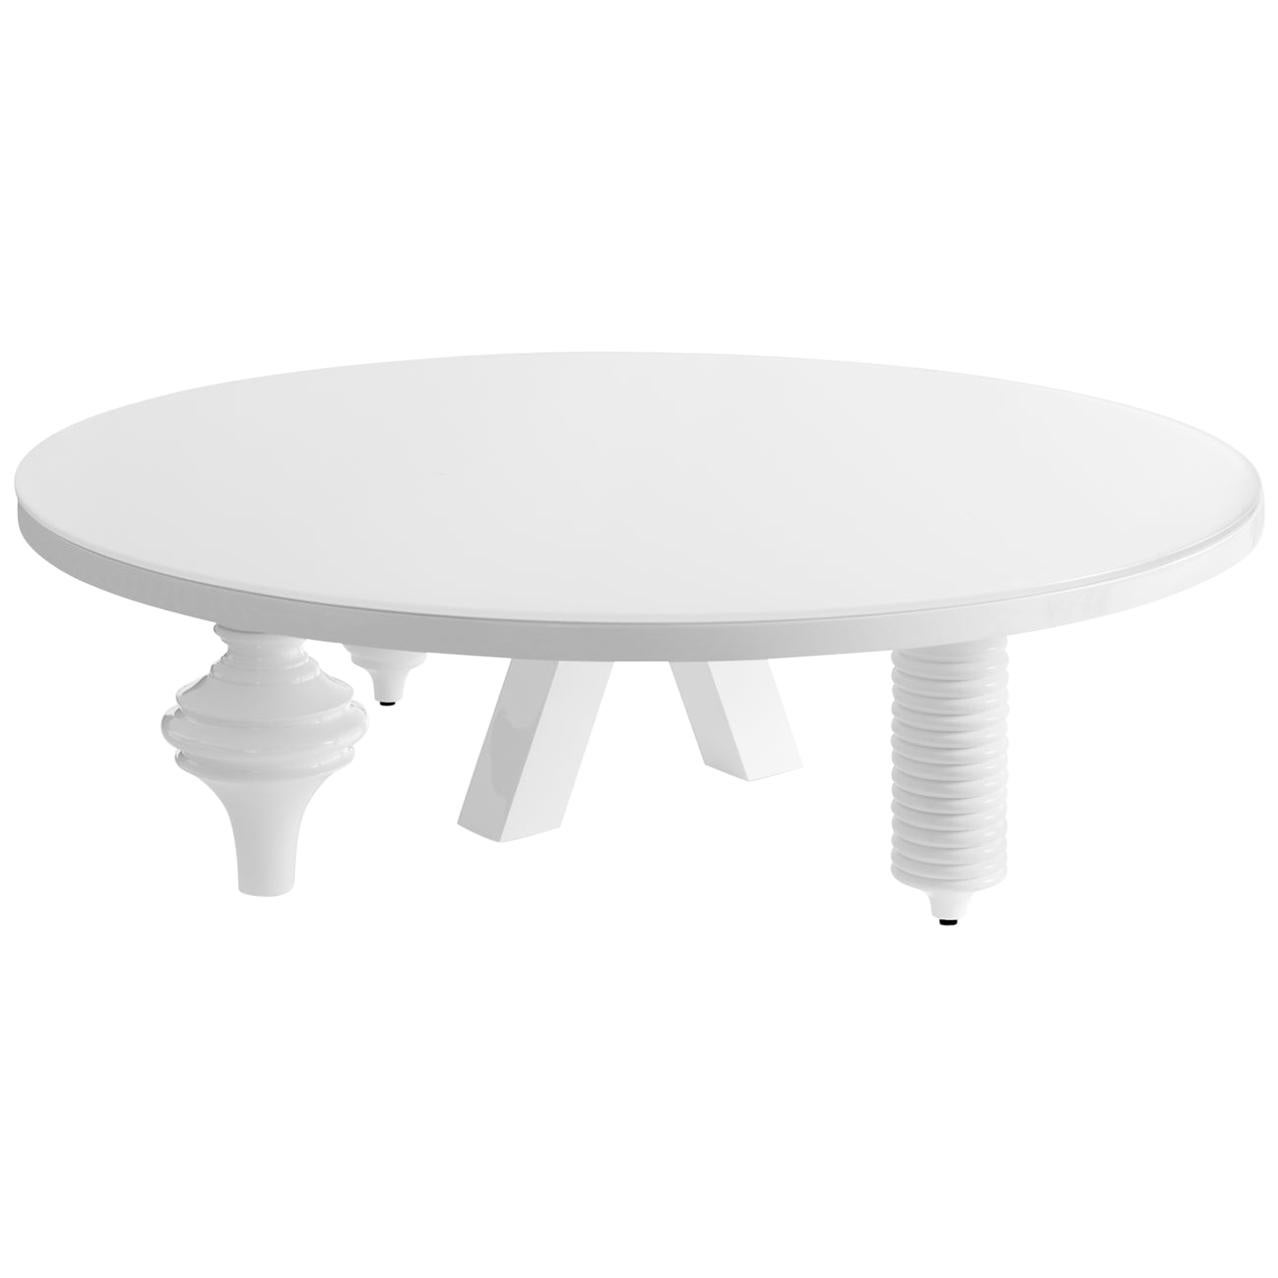 Contemporary round low coffee table model "Multileg" by Jaime Hayon white gloss